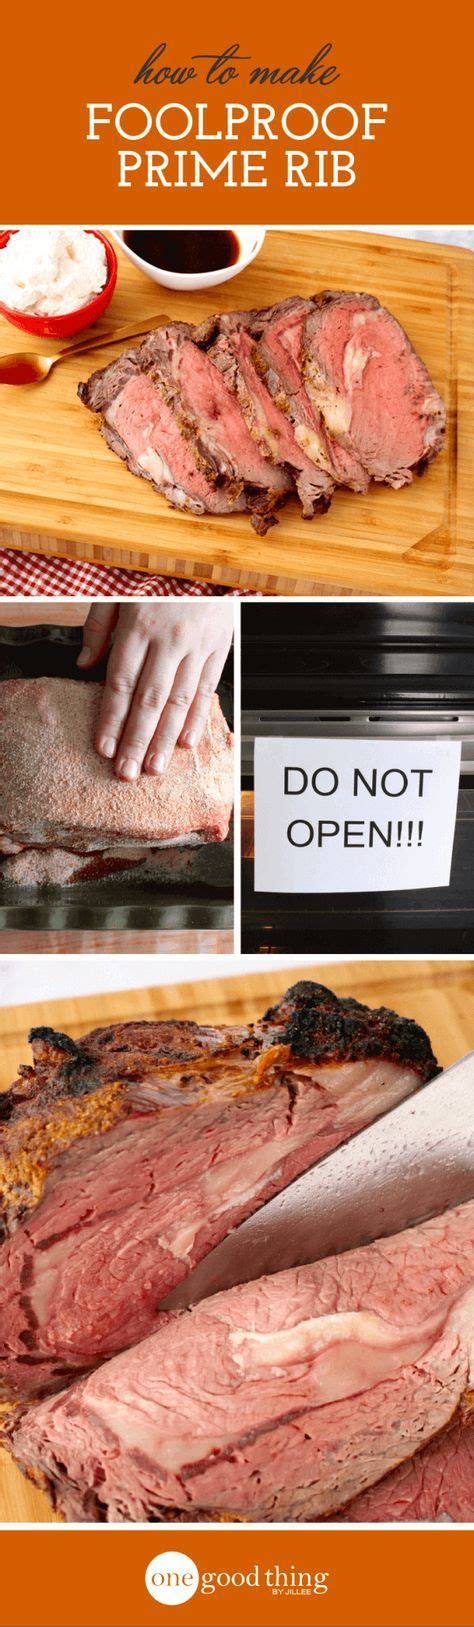 Prime rib | the closed oven method. My very fave recipe for Prime Rib 5-6 minute on highest ...